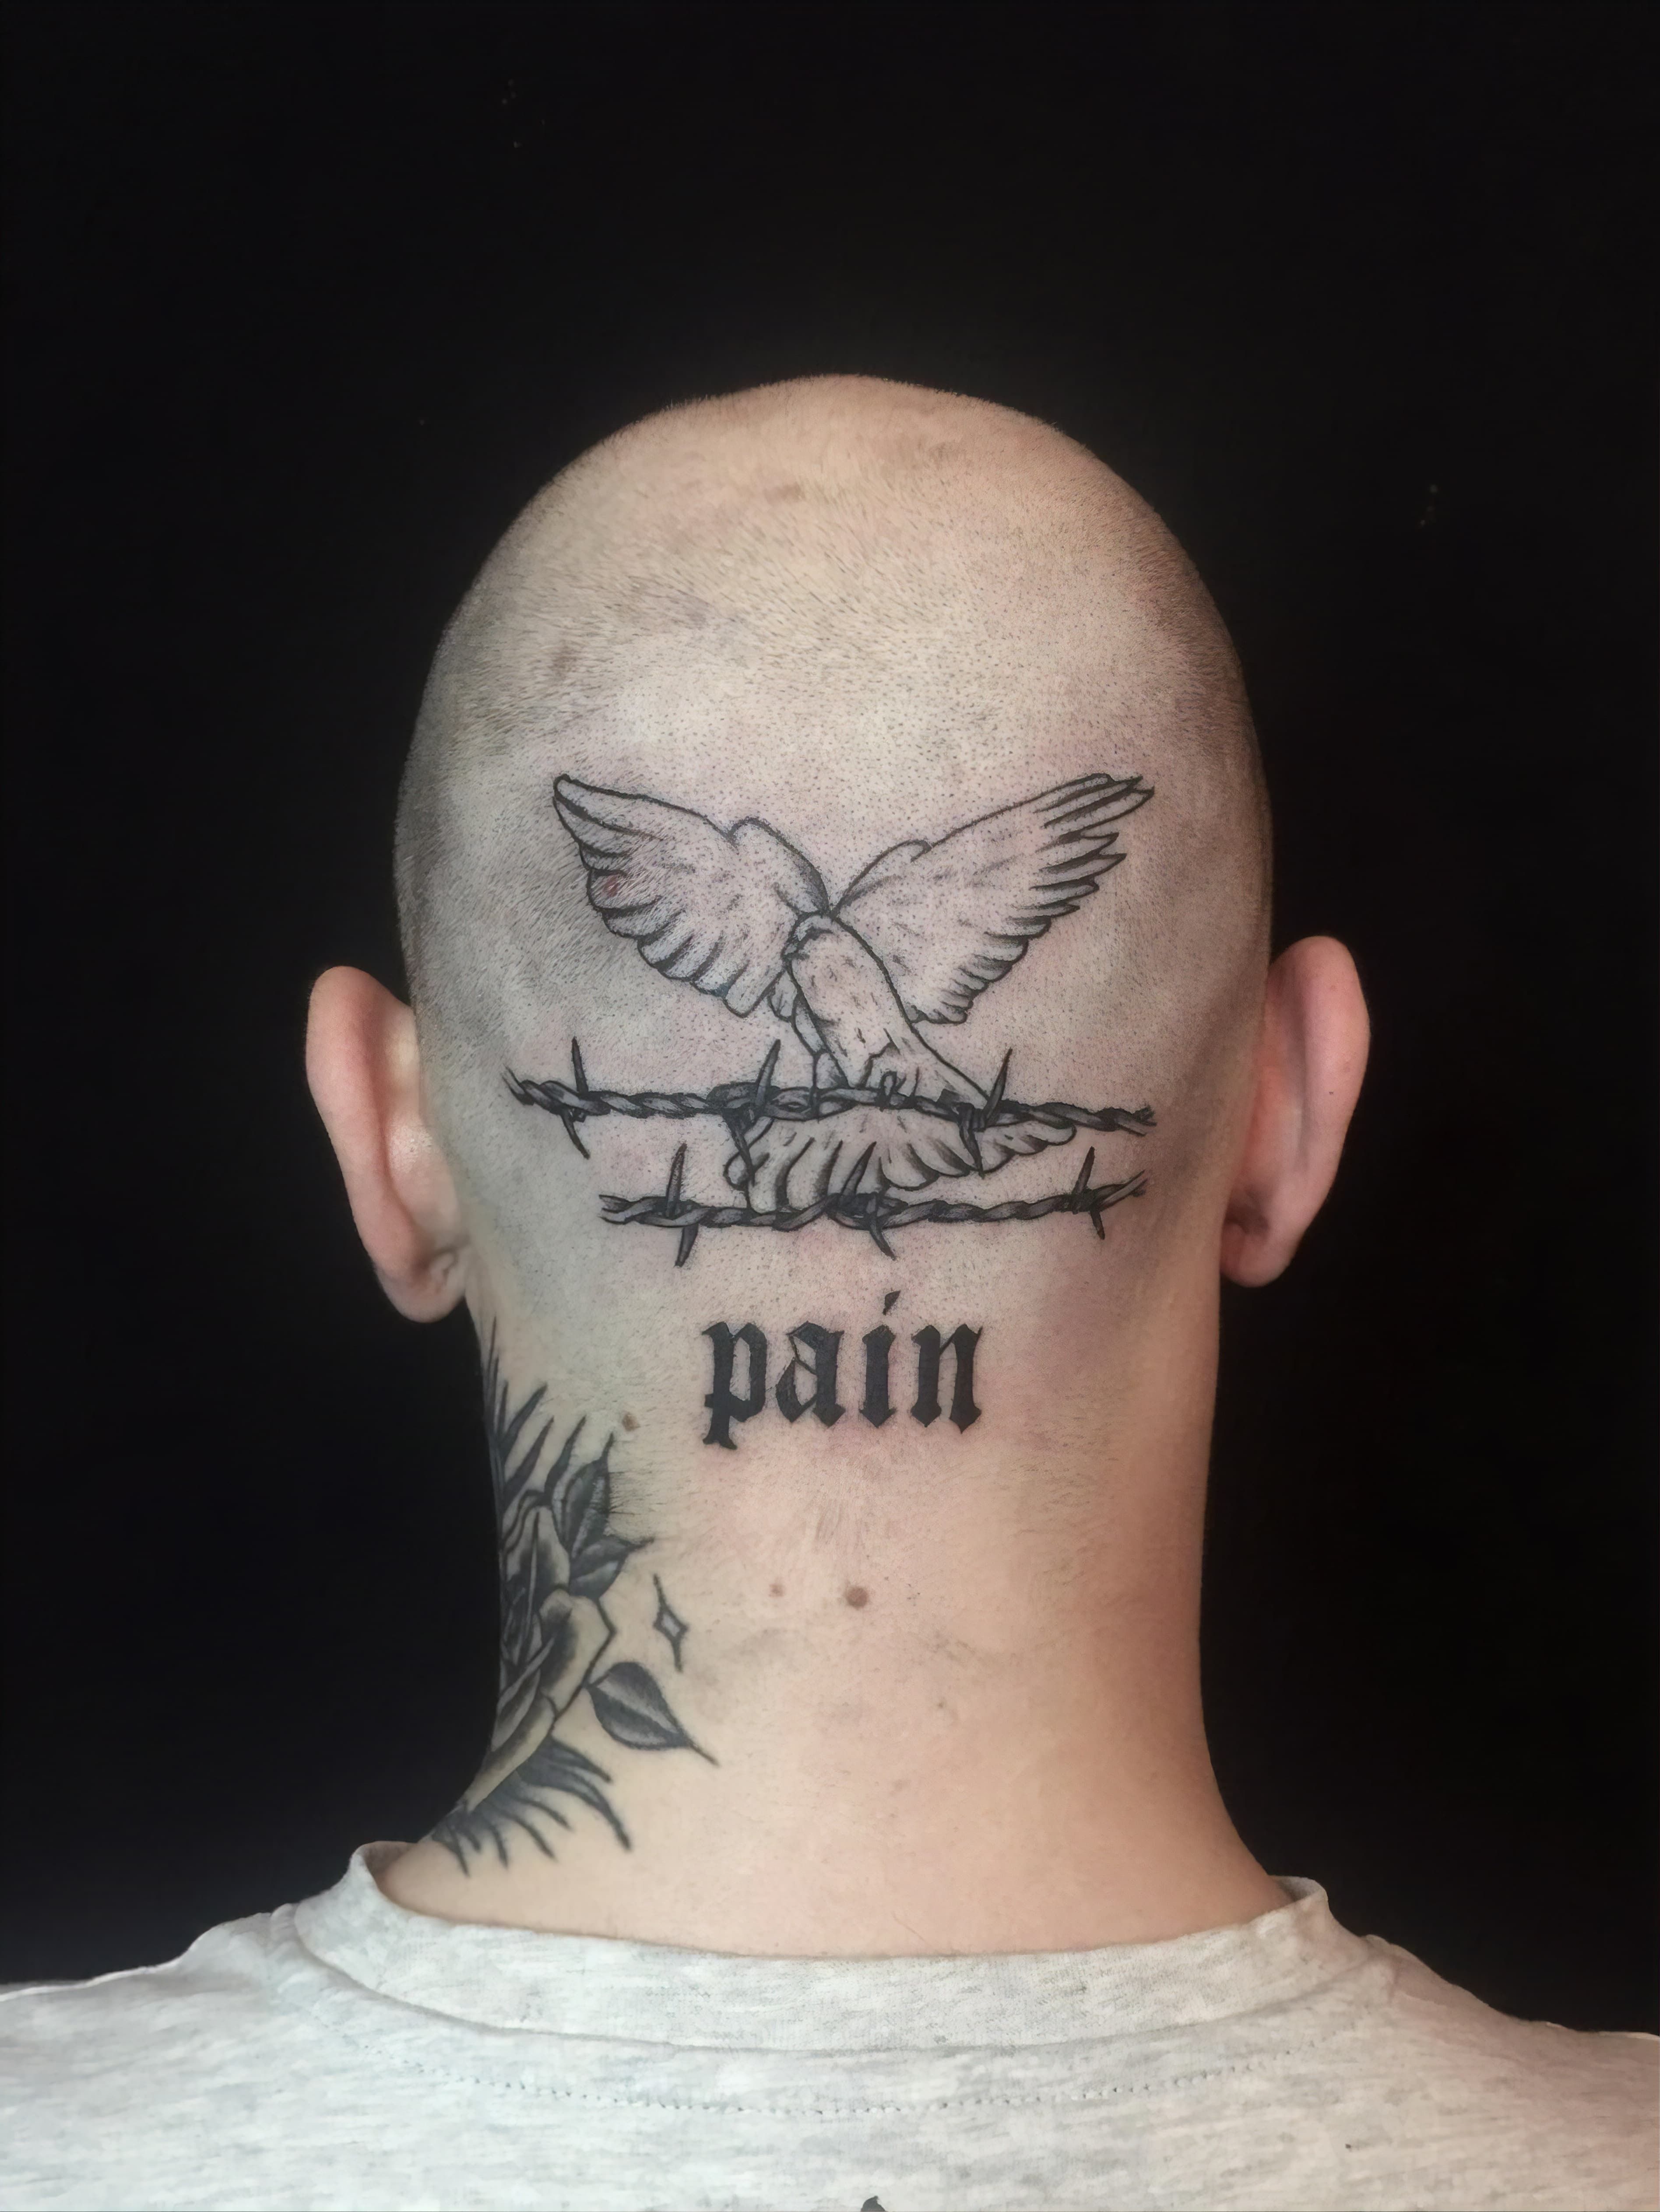 Tattoo about pain